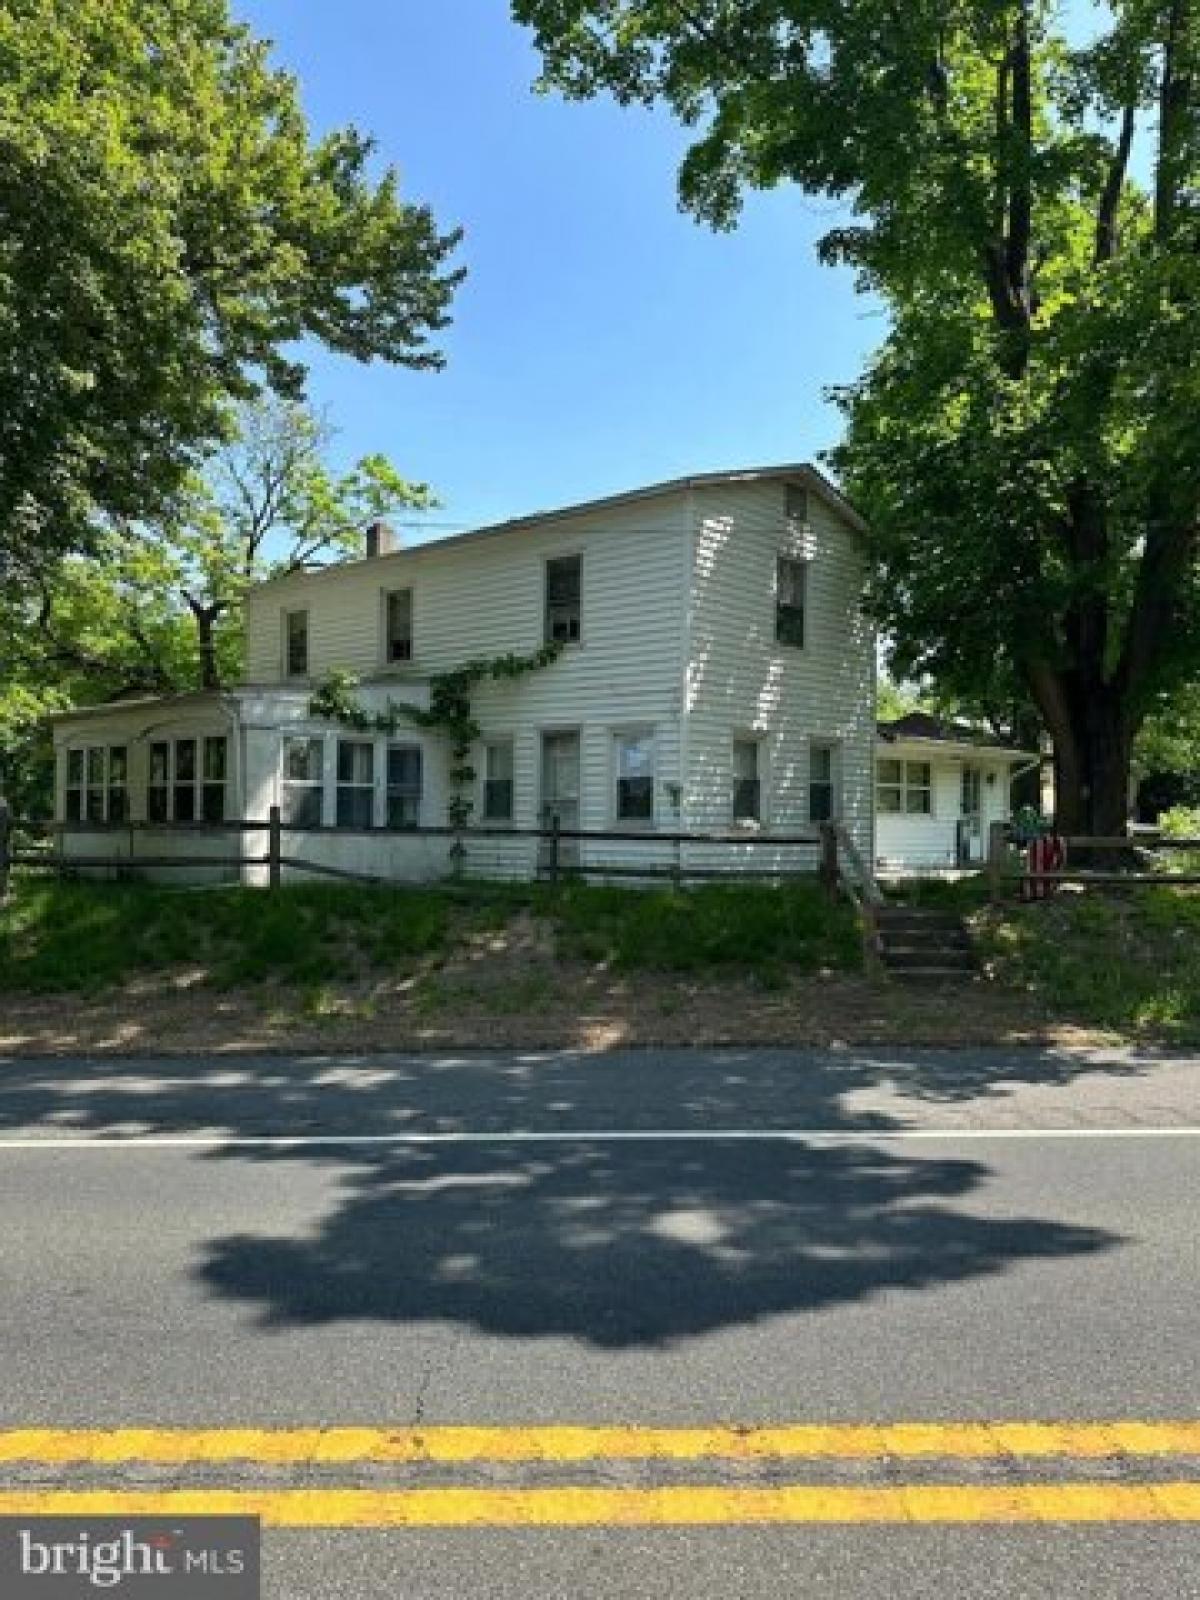 Picture of Home For Sale in Bridgeton, New Jersey, United States